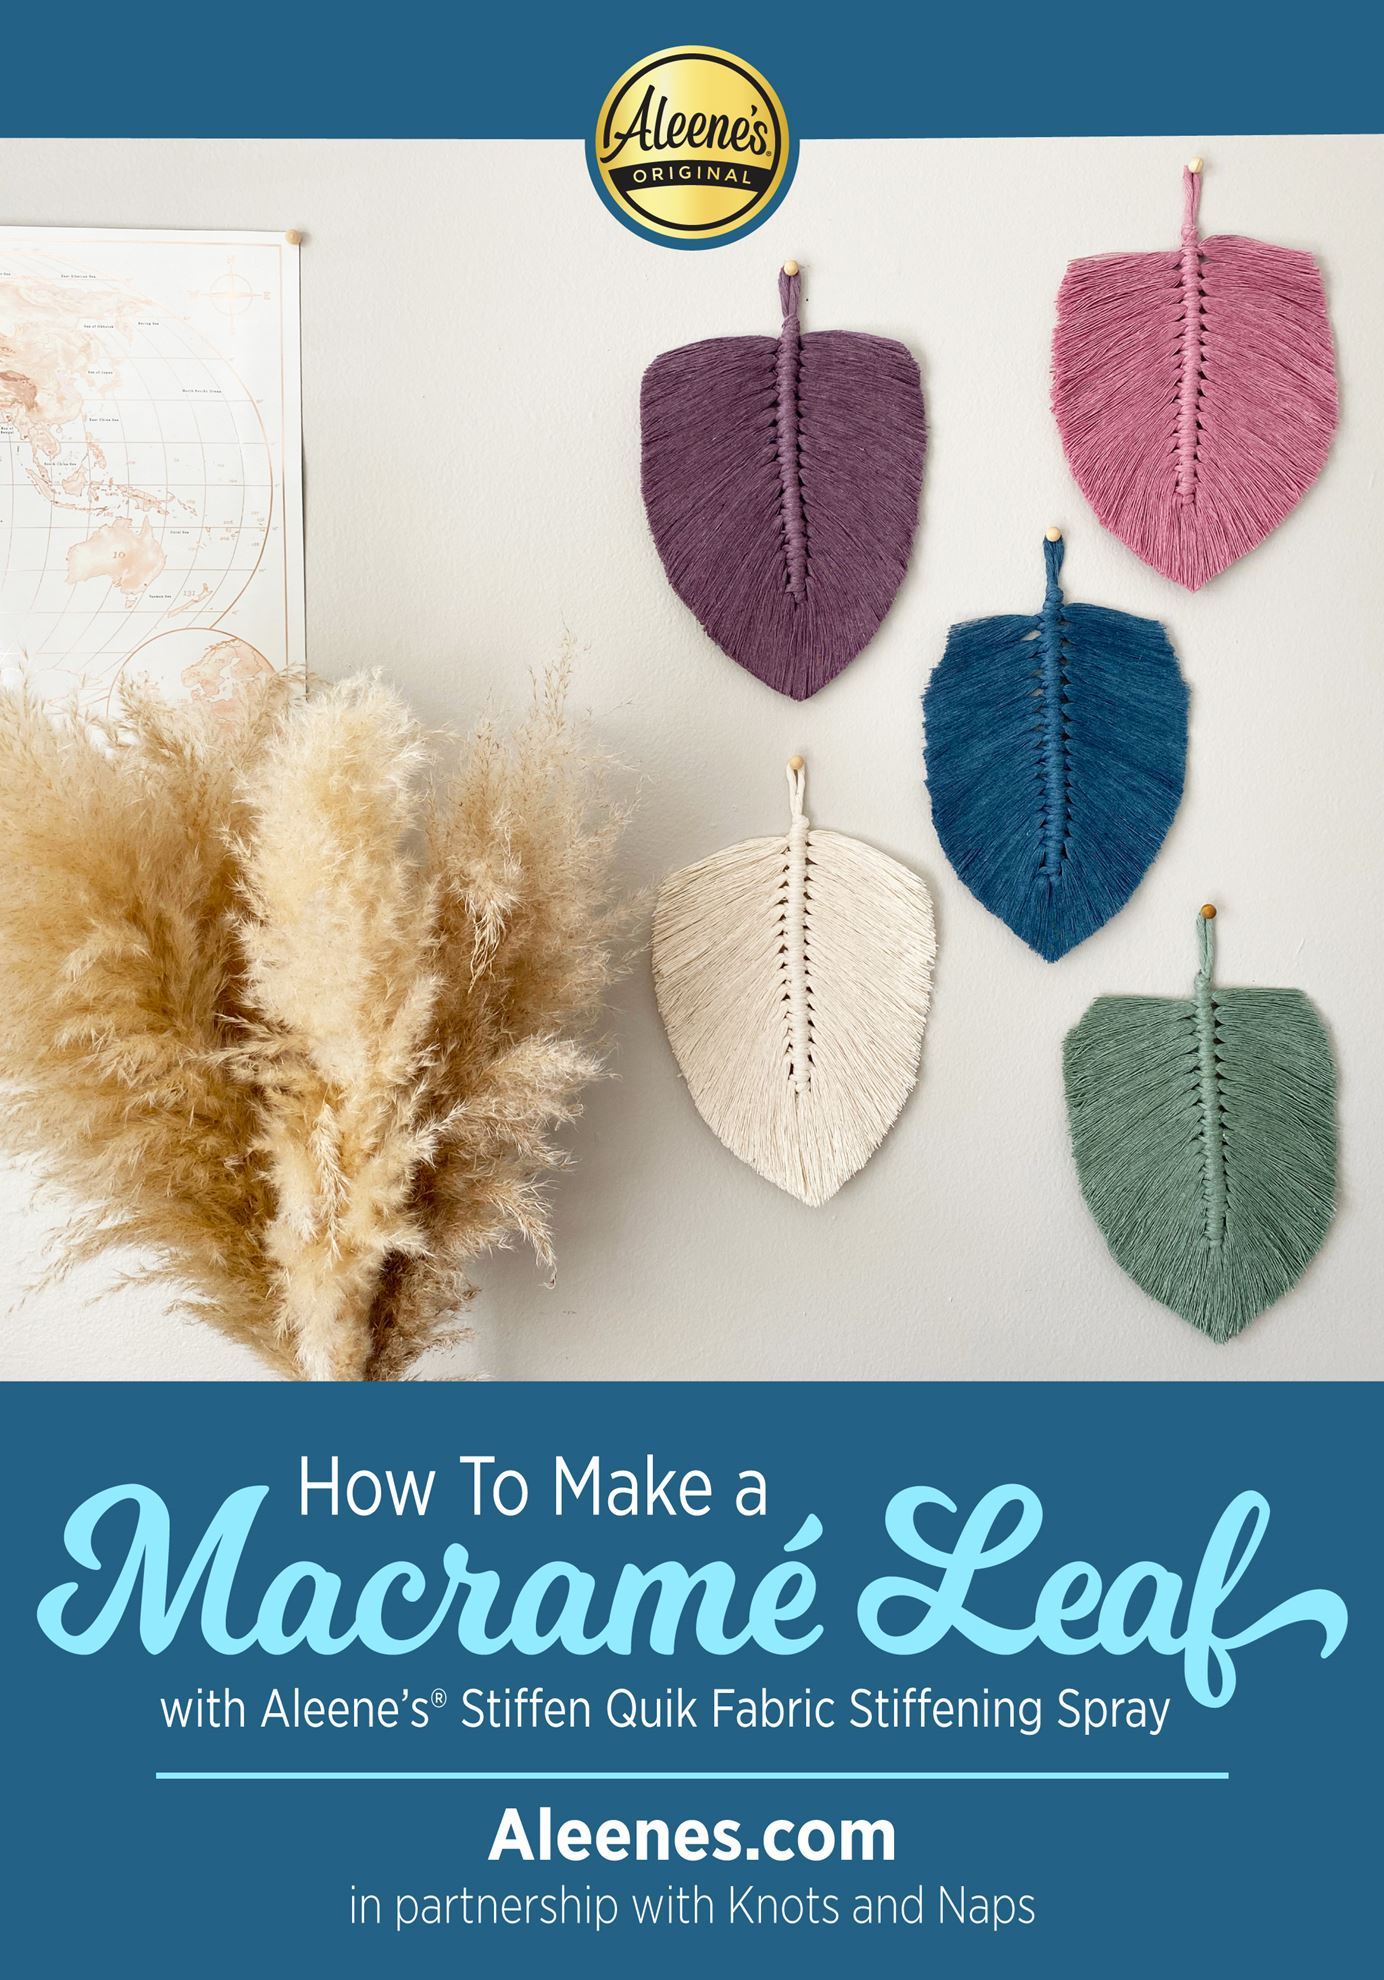 DIY Leaf Patterns for Macramé: How to Make Macrame Leaves for Your